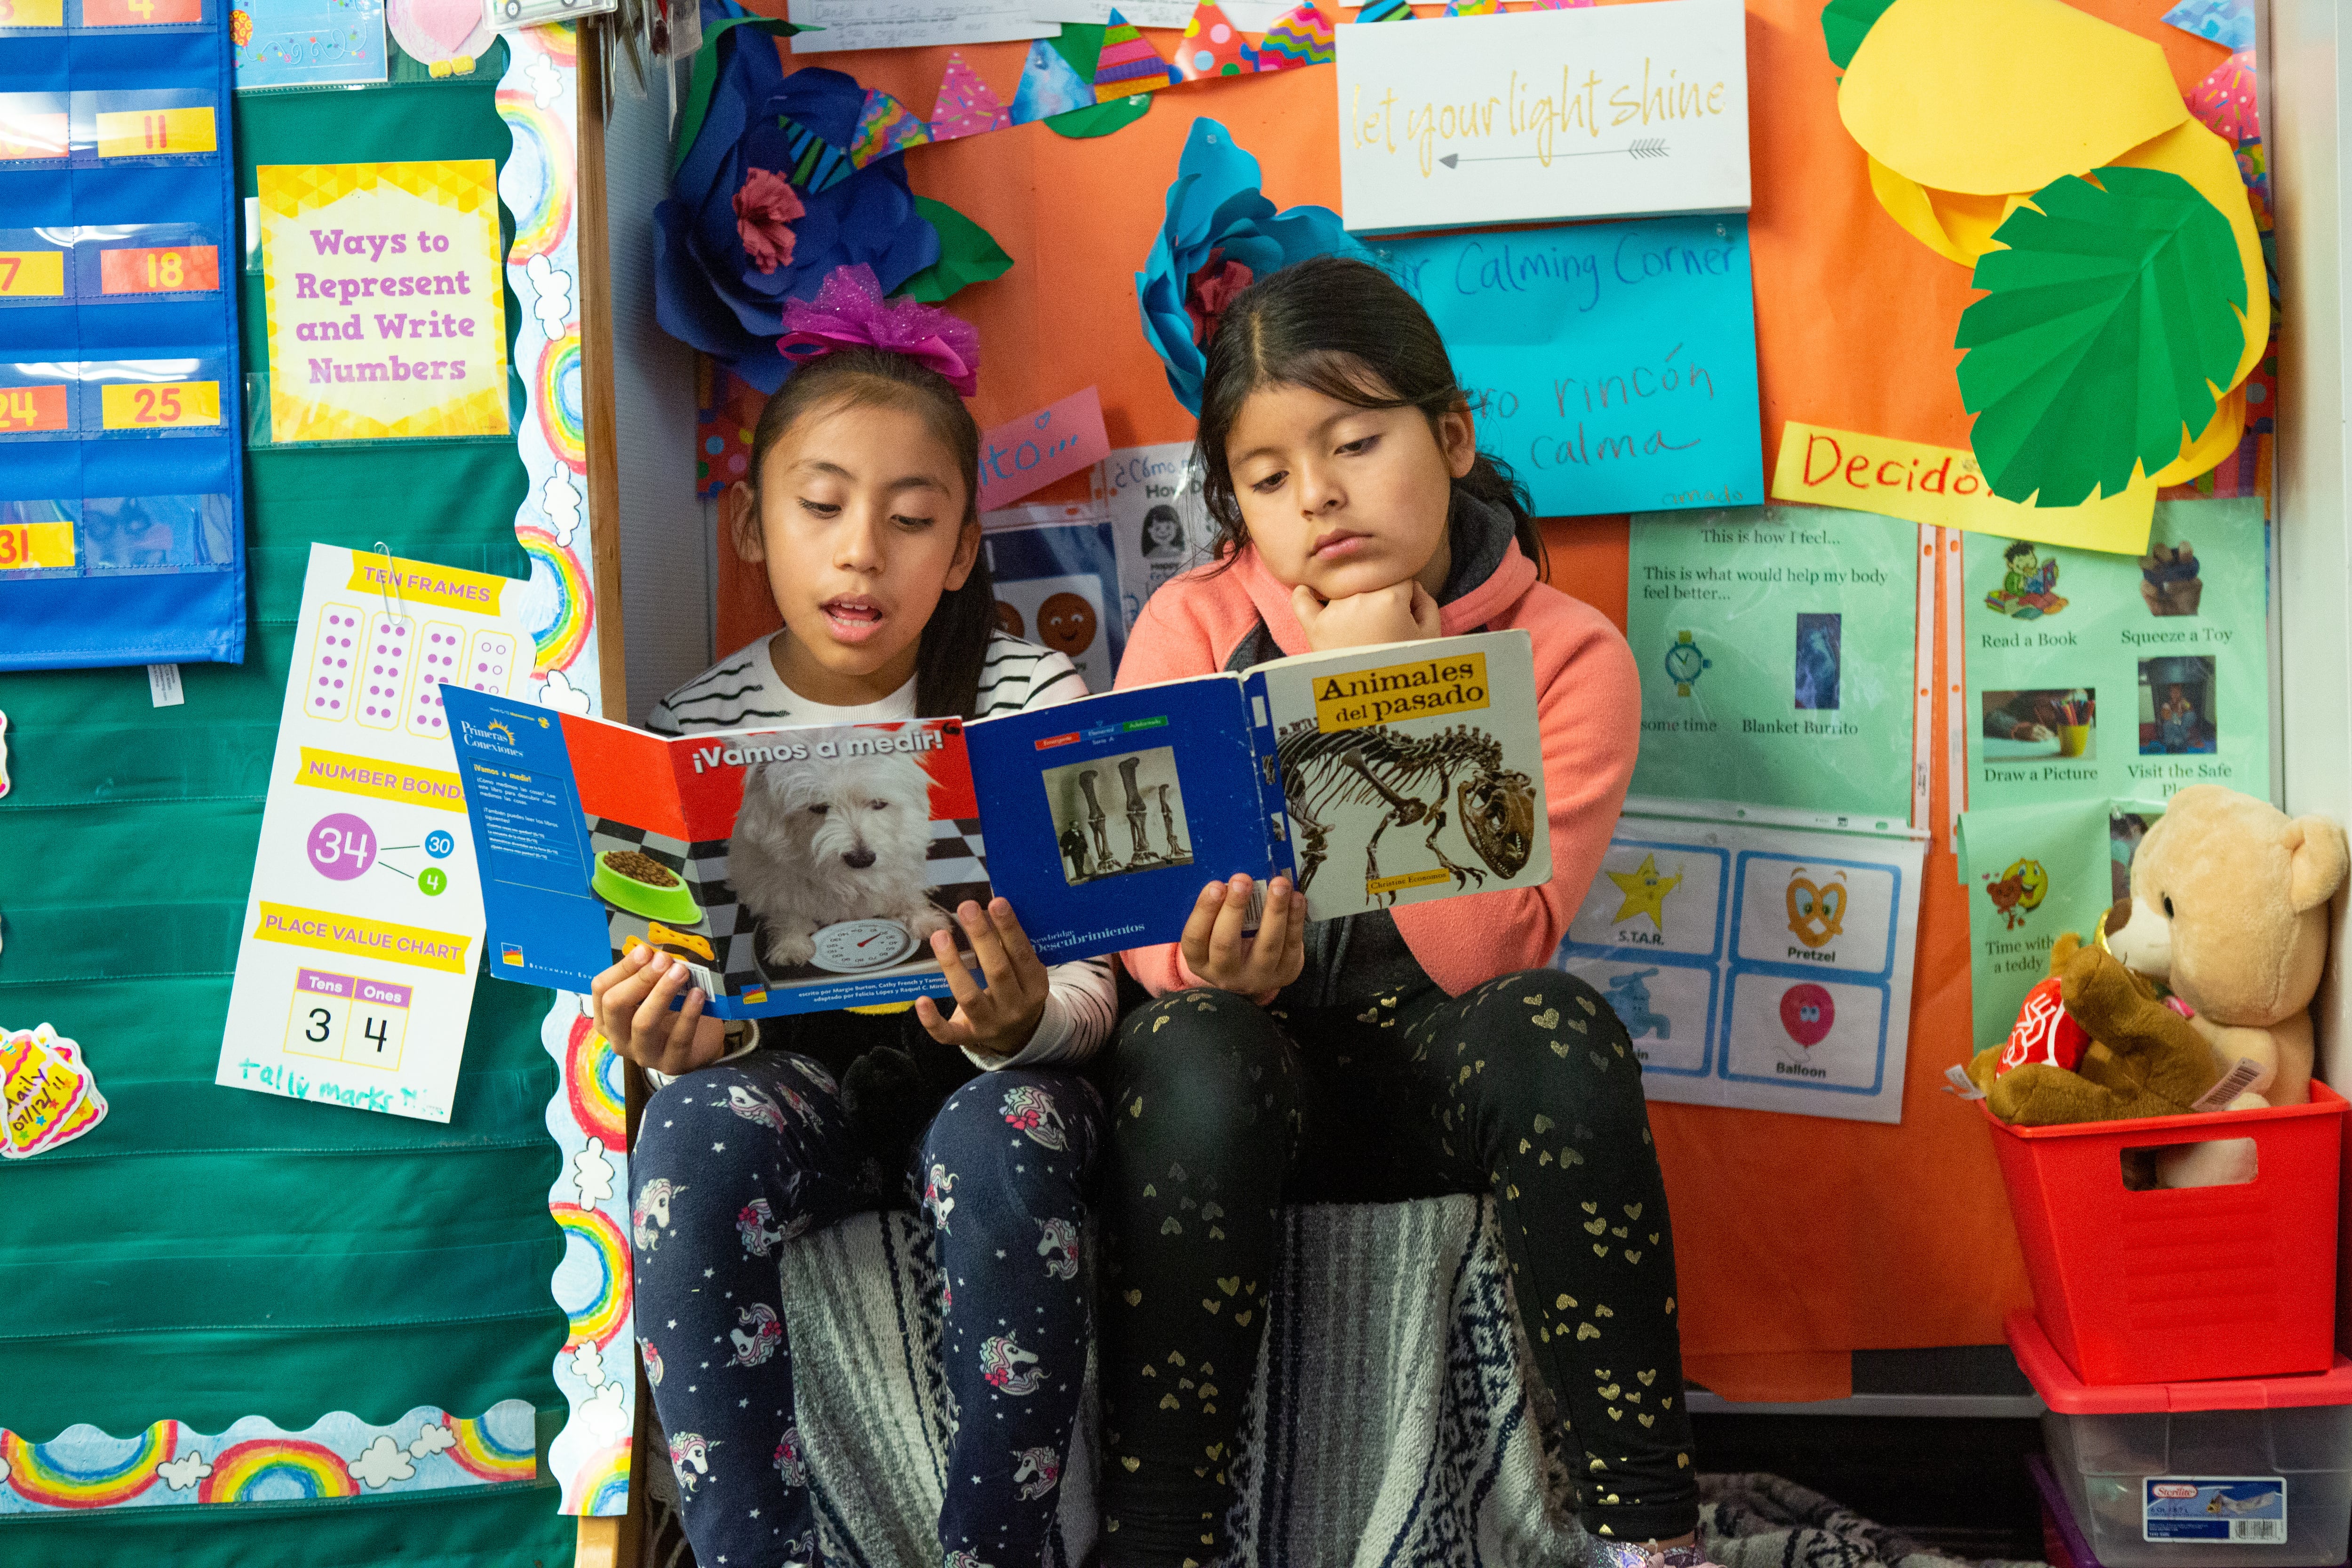 Two students sit next to each other reading a book with a colorful wall in the background.